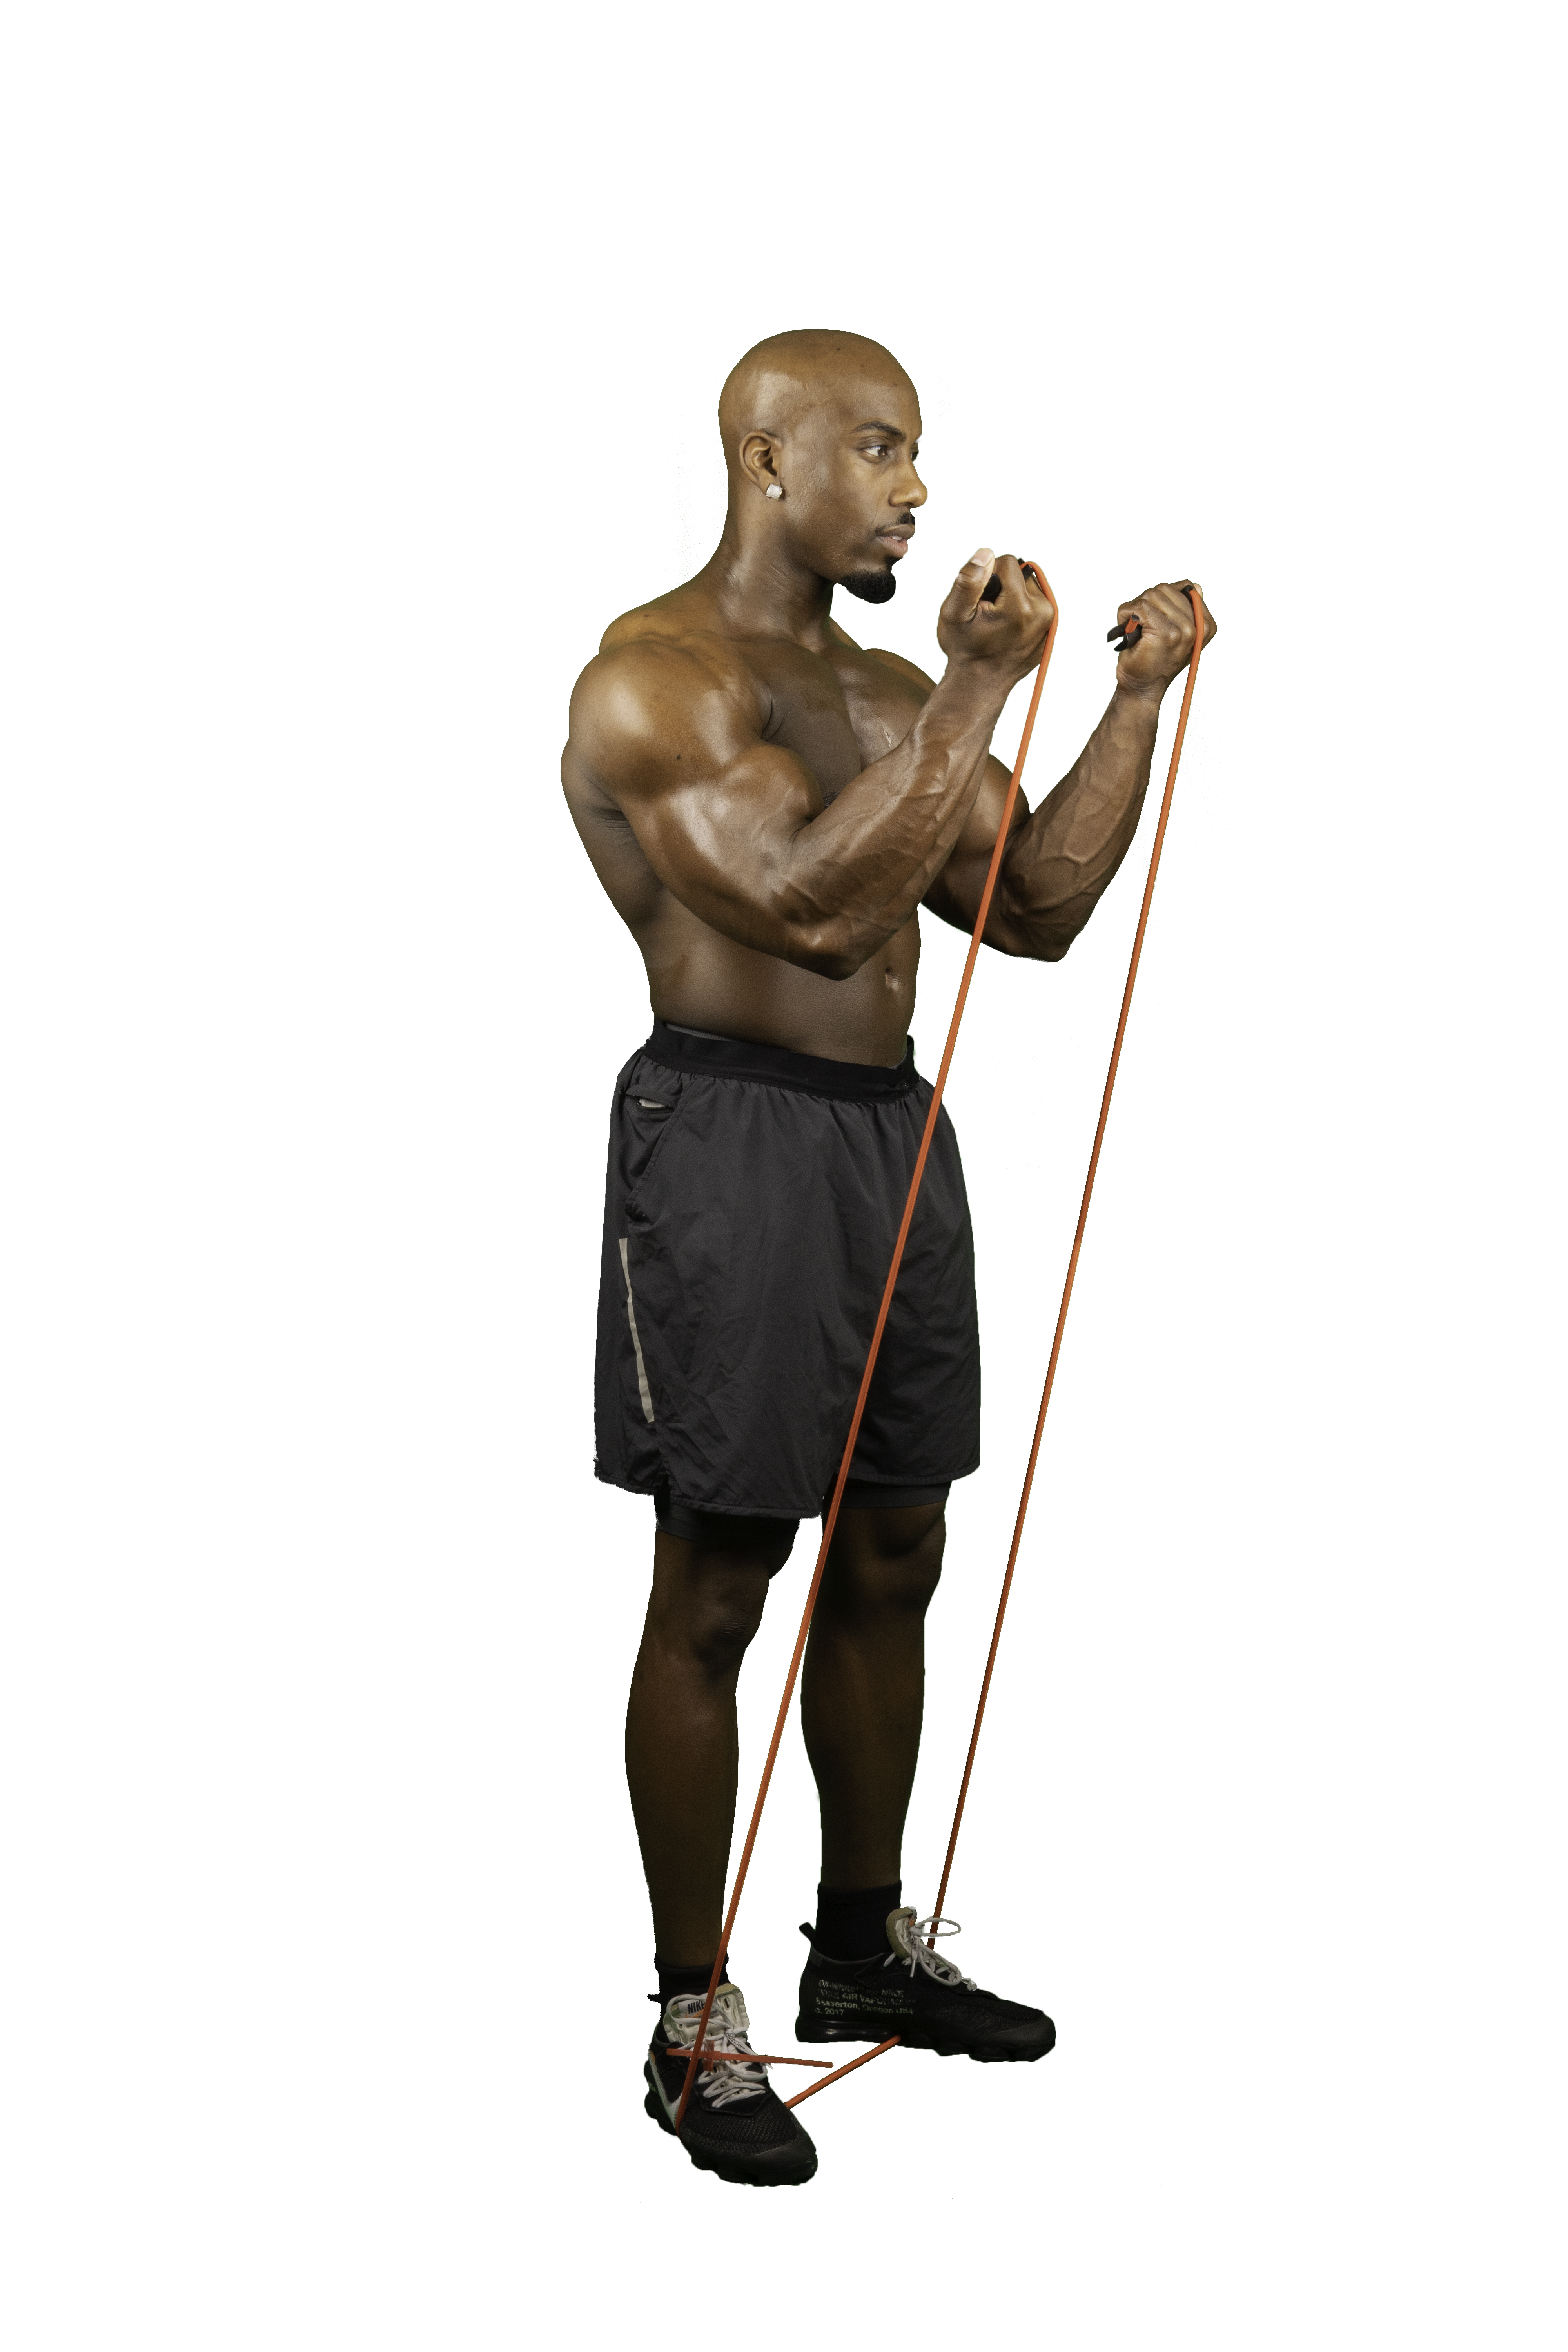 Stamina Training with DovFlex Rope